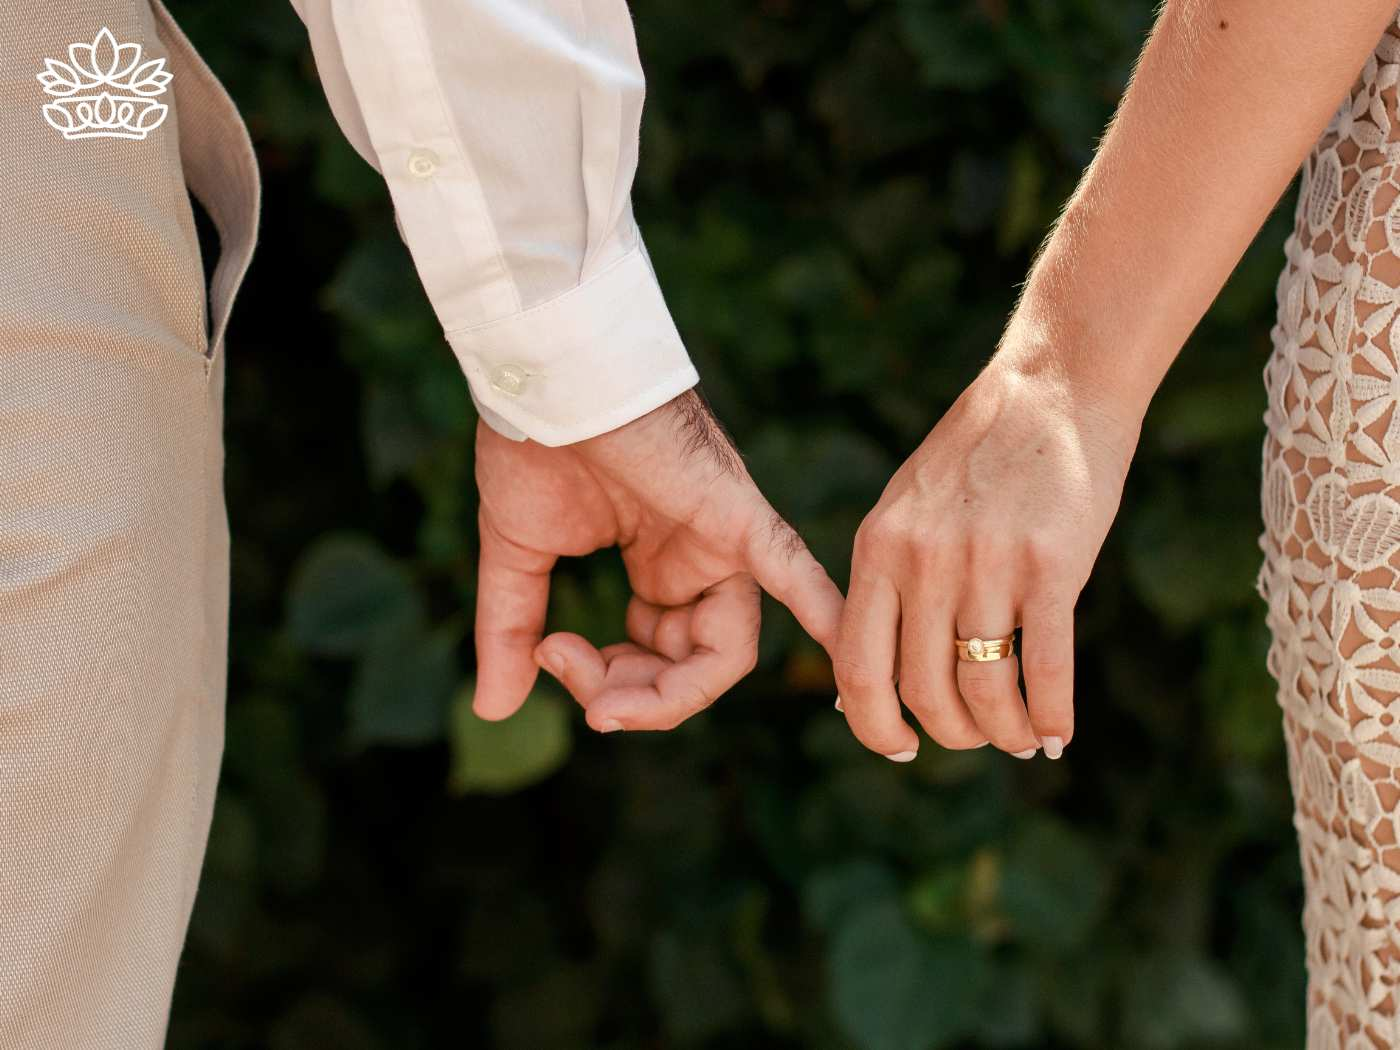 Close-up of a couple tenderly holding pinky fingers, showcasing their wedding rings against a backdrop of lush greenery. The intimate gesture highlights their connection and commitment, perfect for celebrating with Fabulous Flowers and Gifts. Gift Boxes for wife. Delivered with Heart.